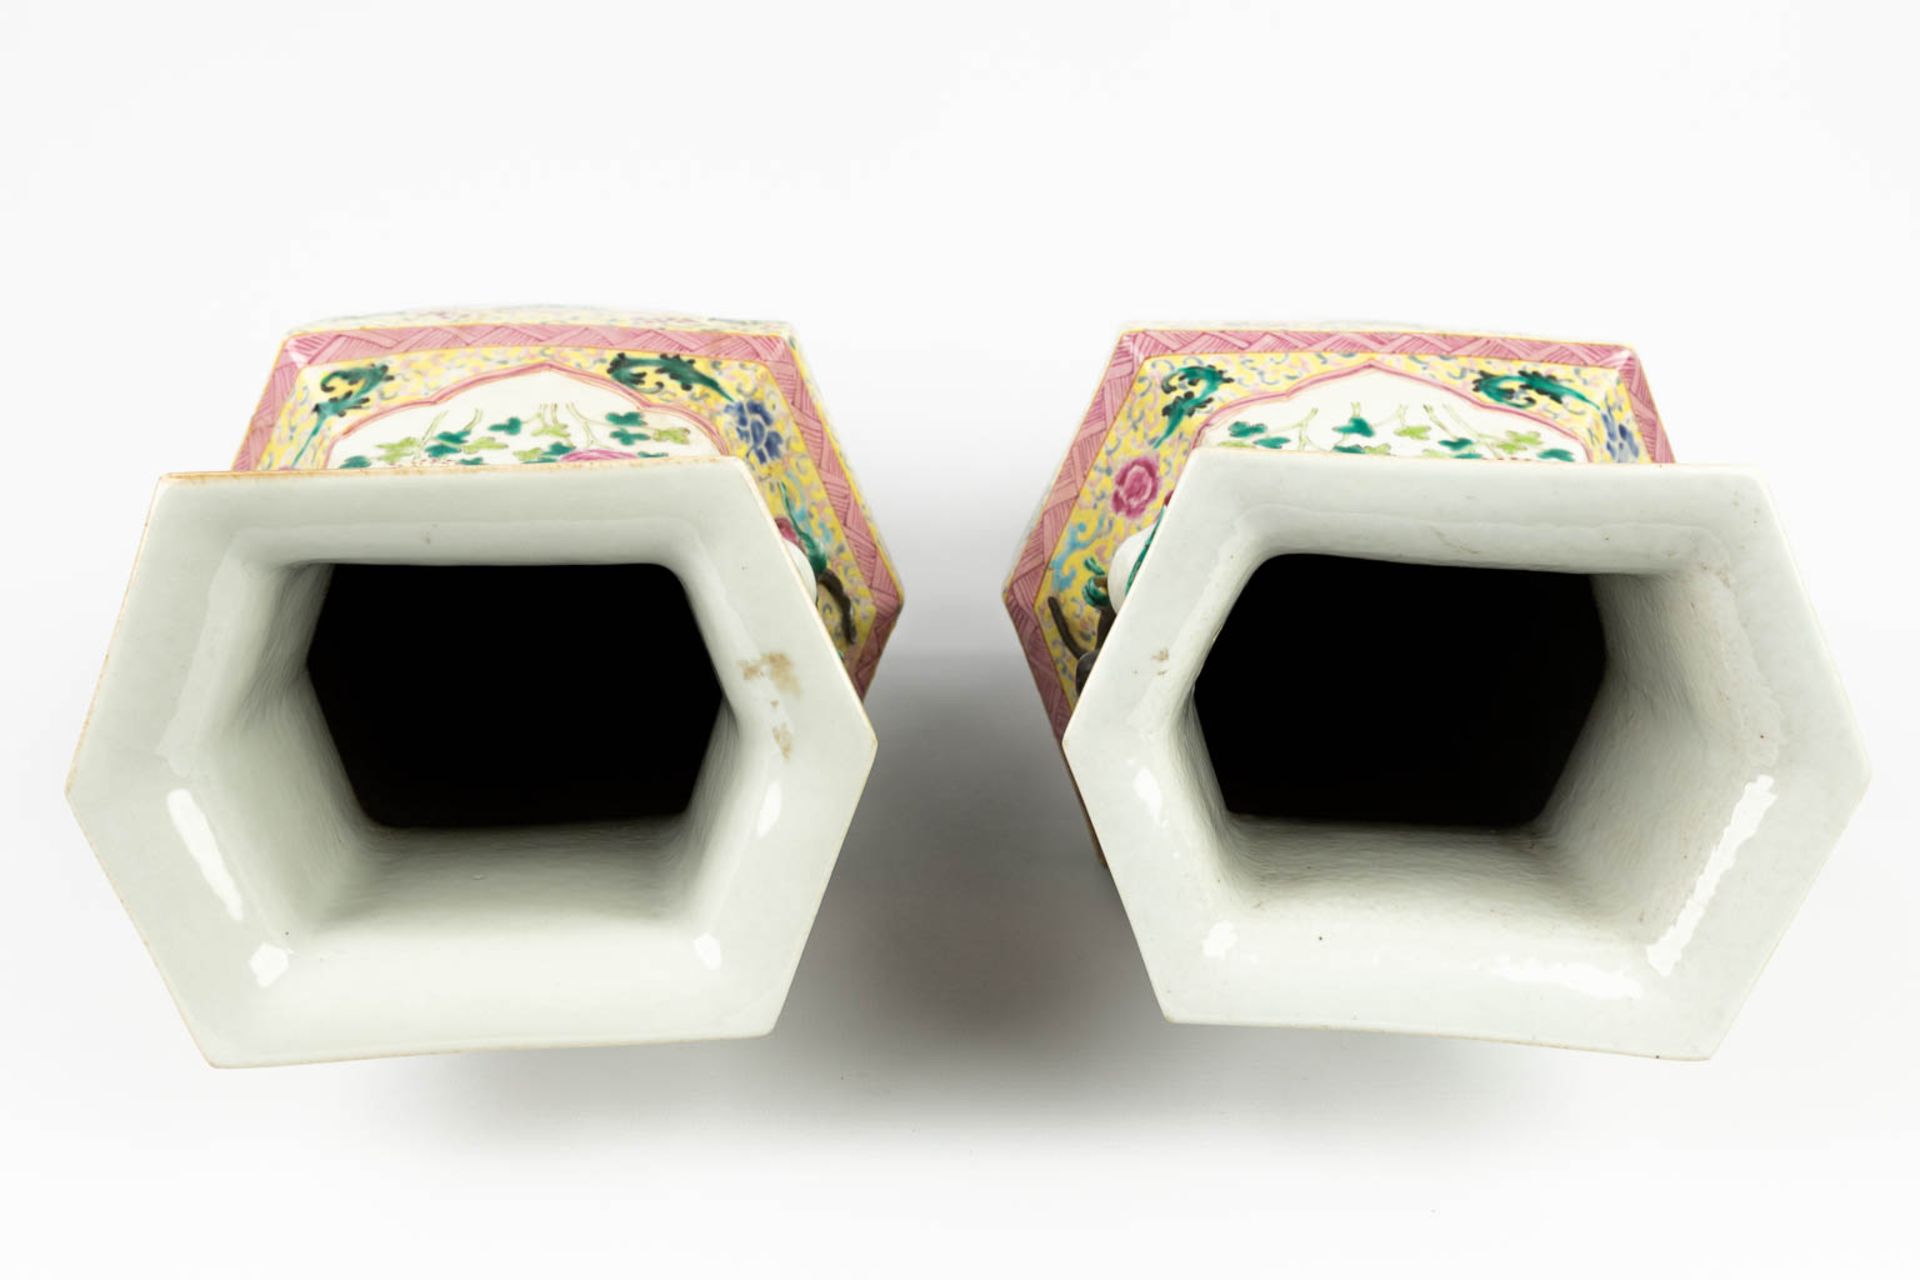 A pair of hexagonal Chinese vases made of porcelain (18 x 22 x 46 cm) - Image 2 of 17